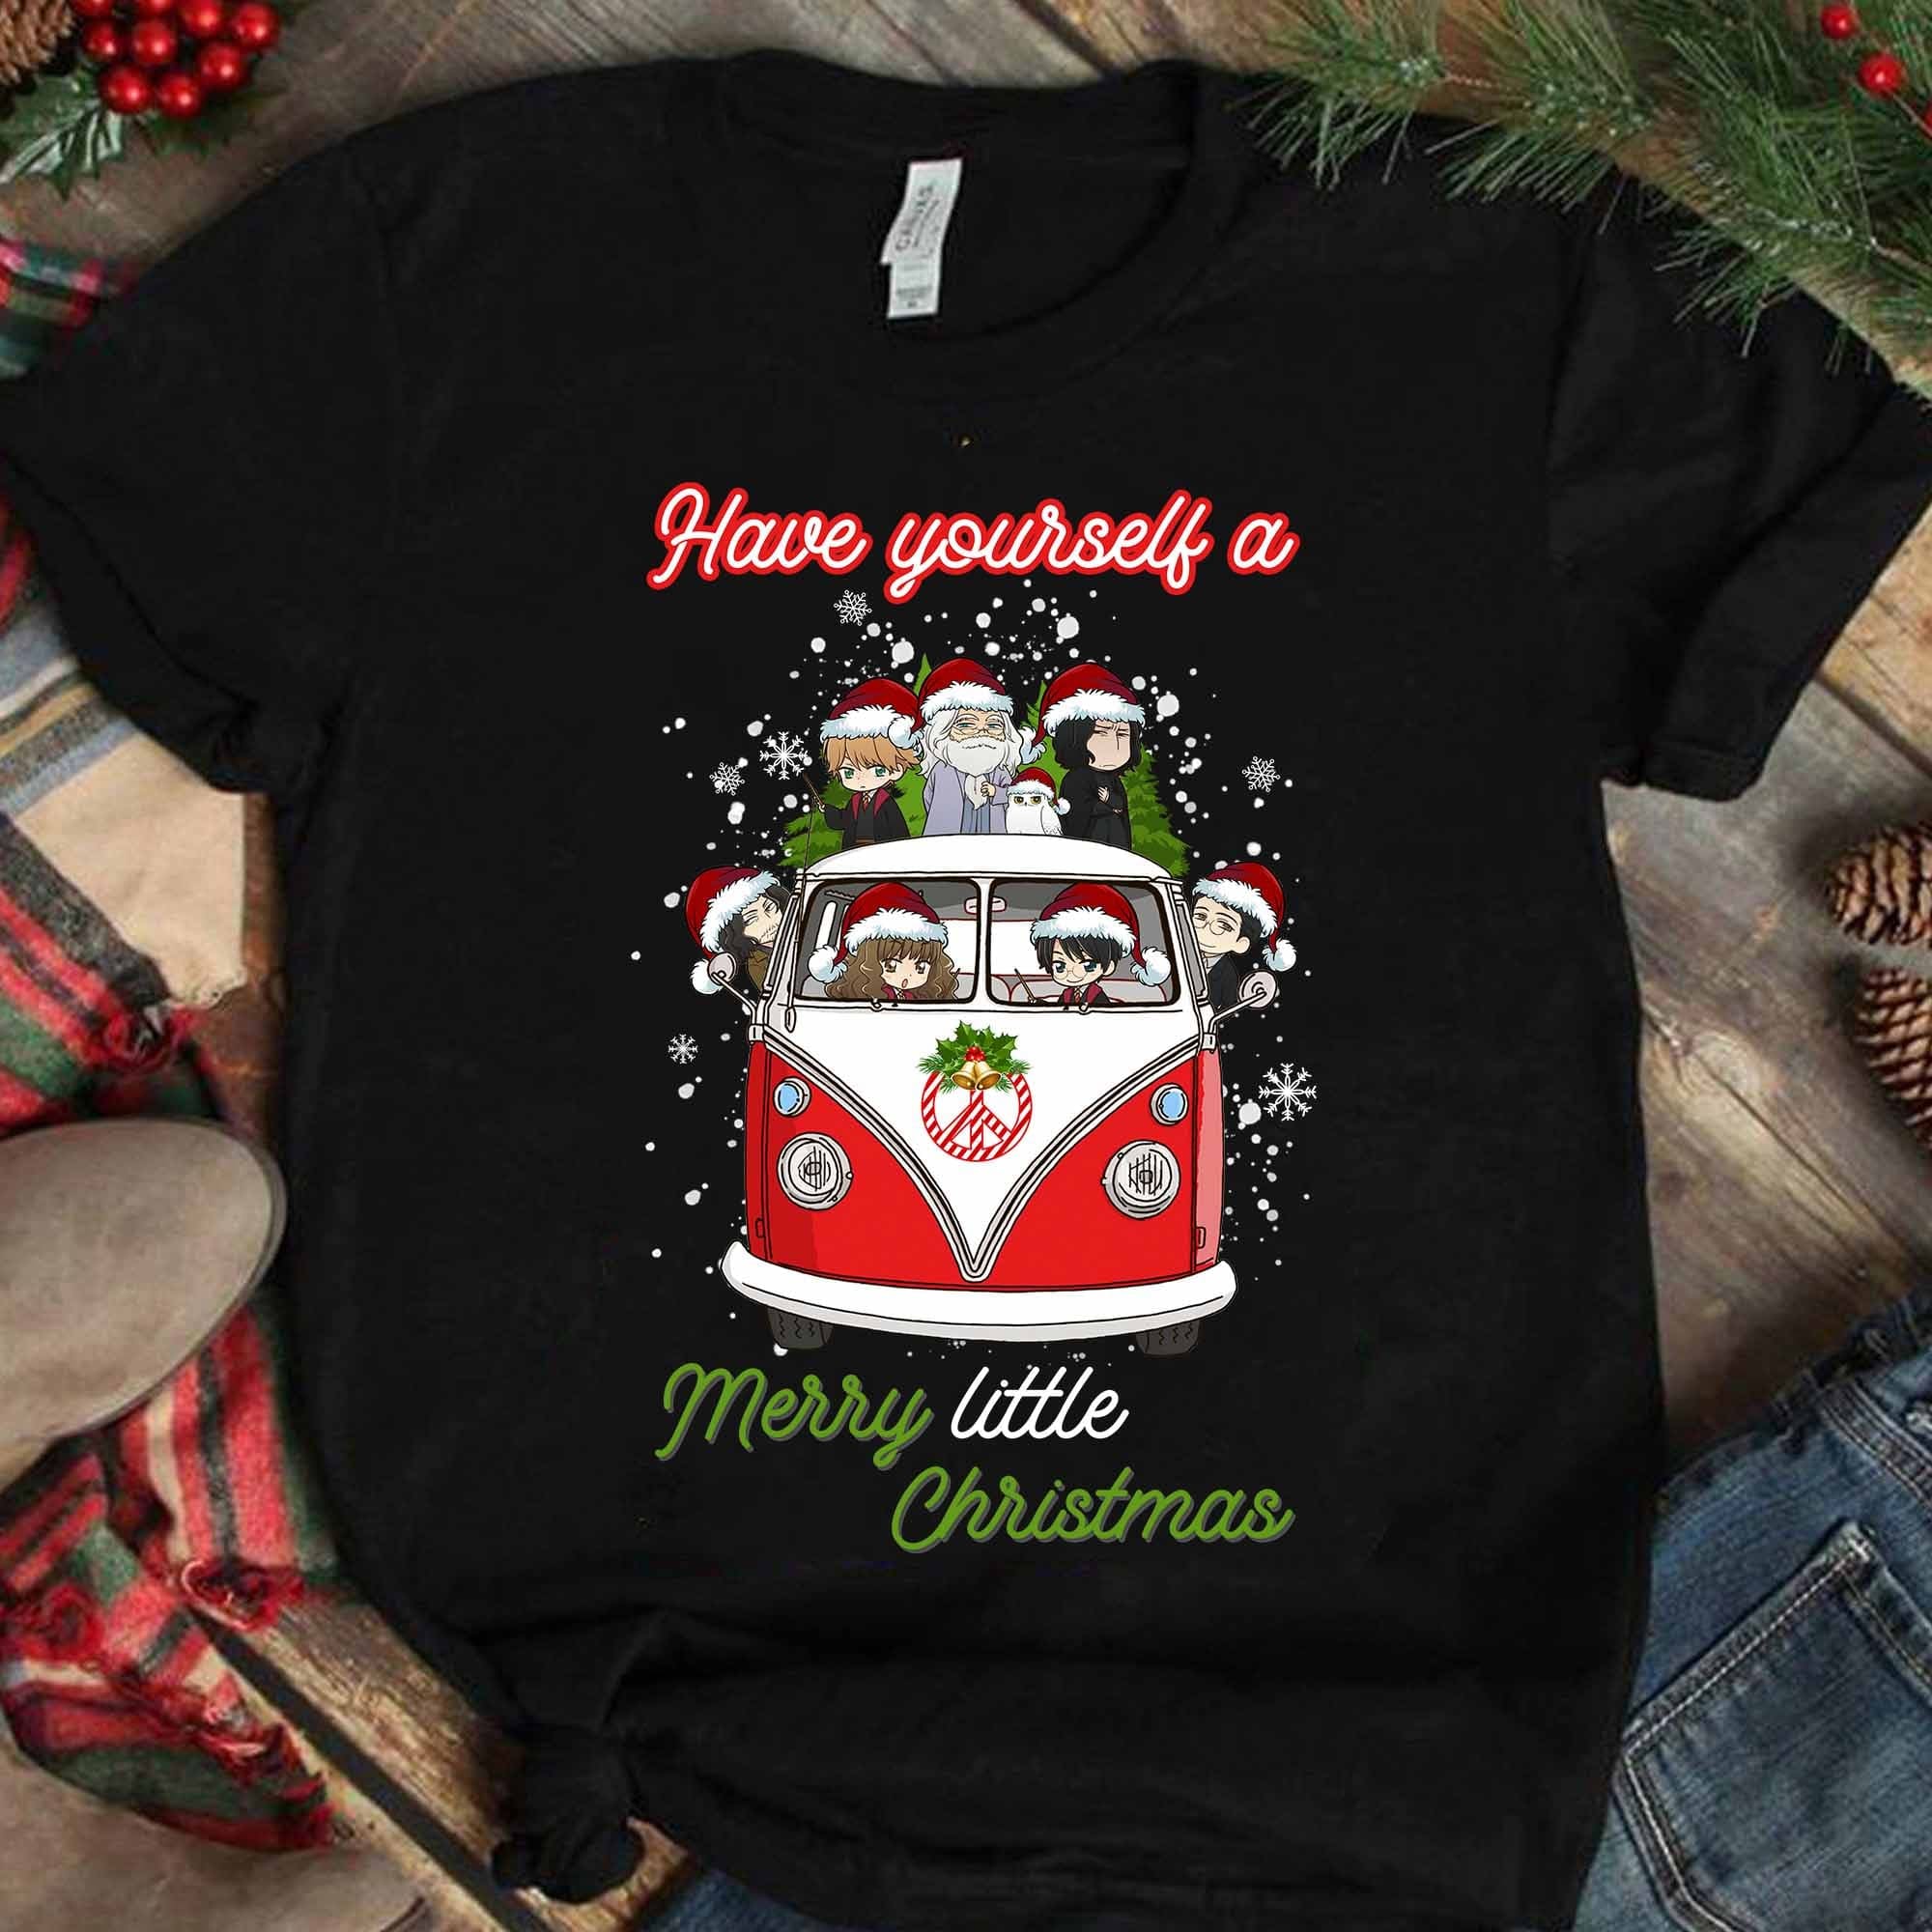 Have yourself a mery little Christmas - Hippie lifestyle, Christmas ugly sweater